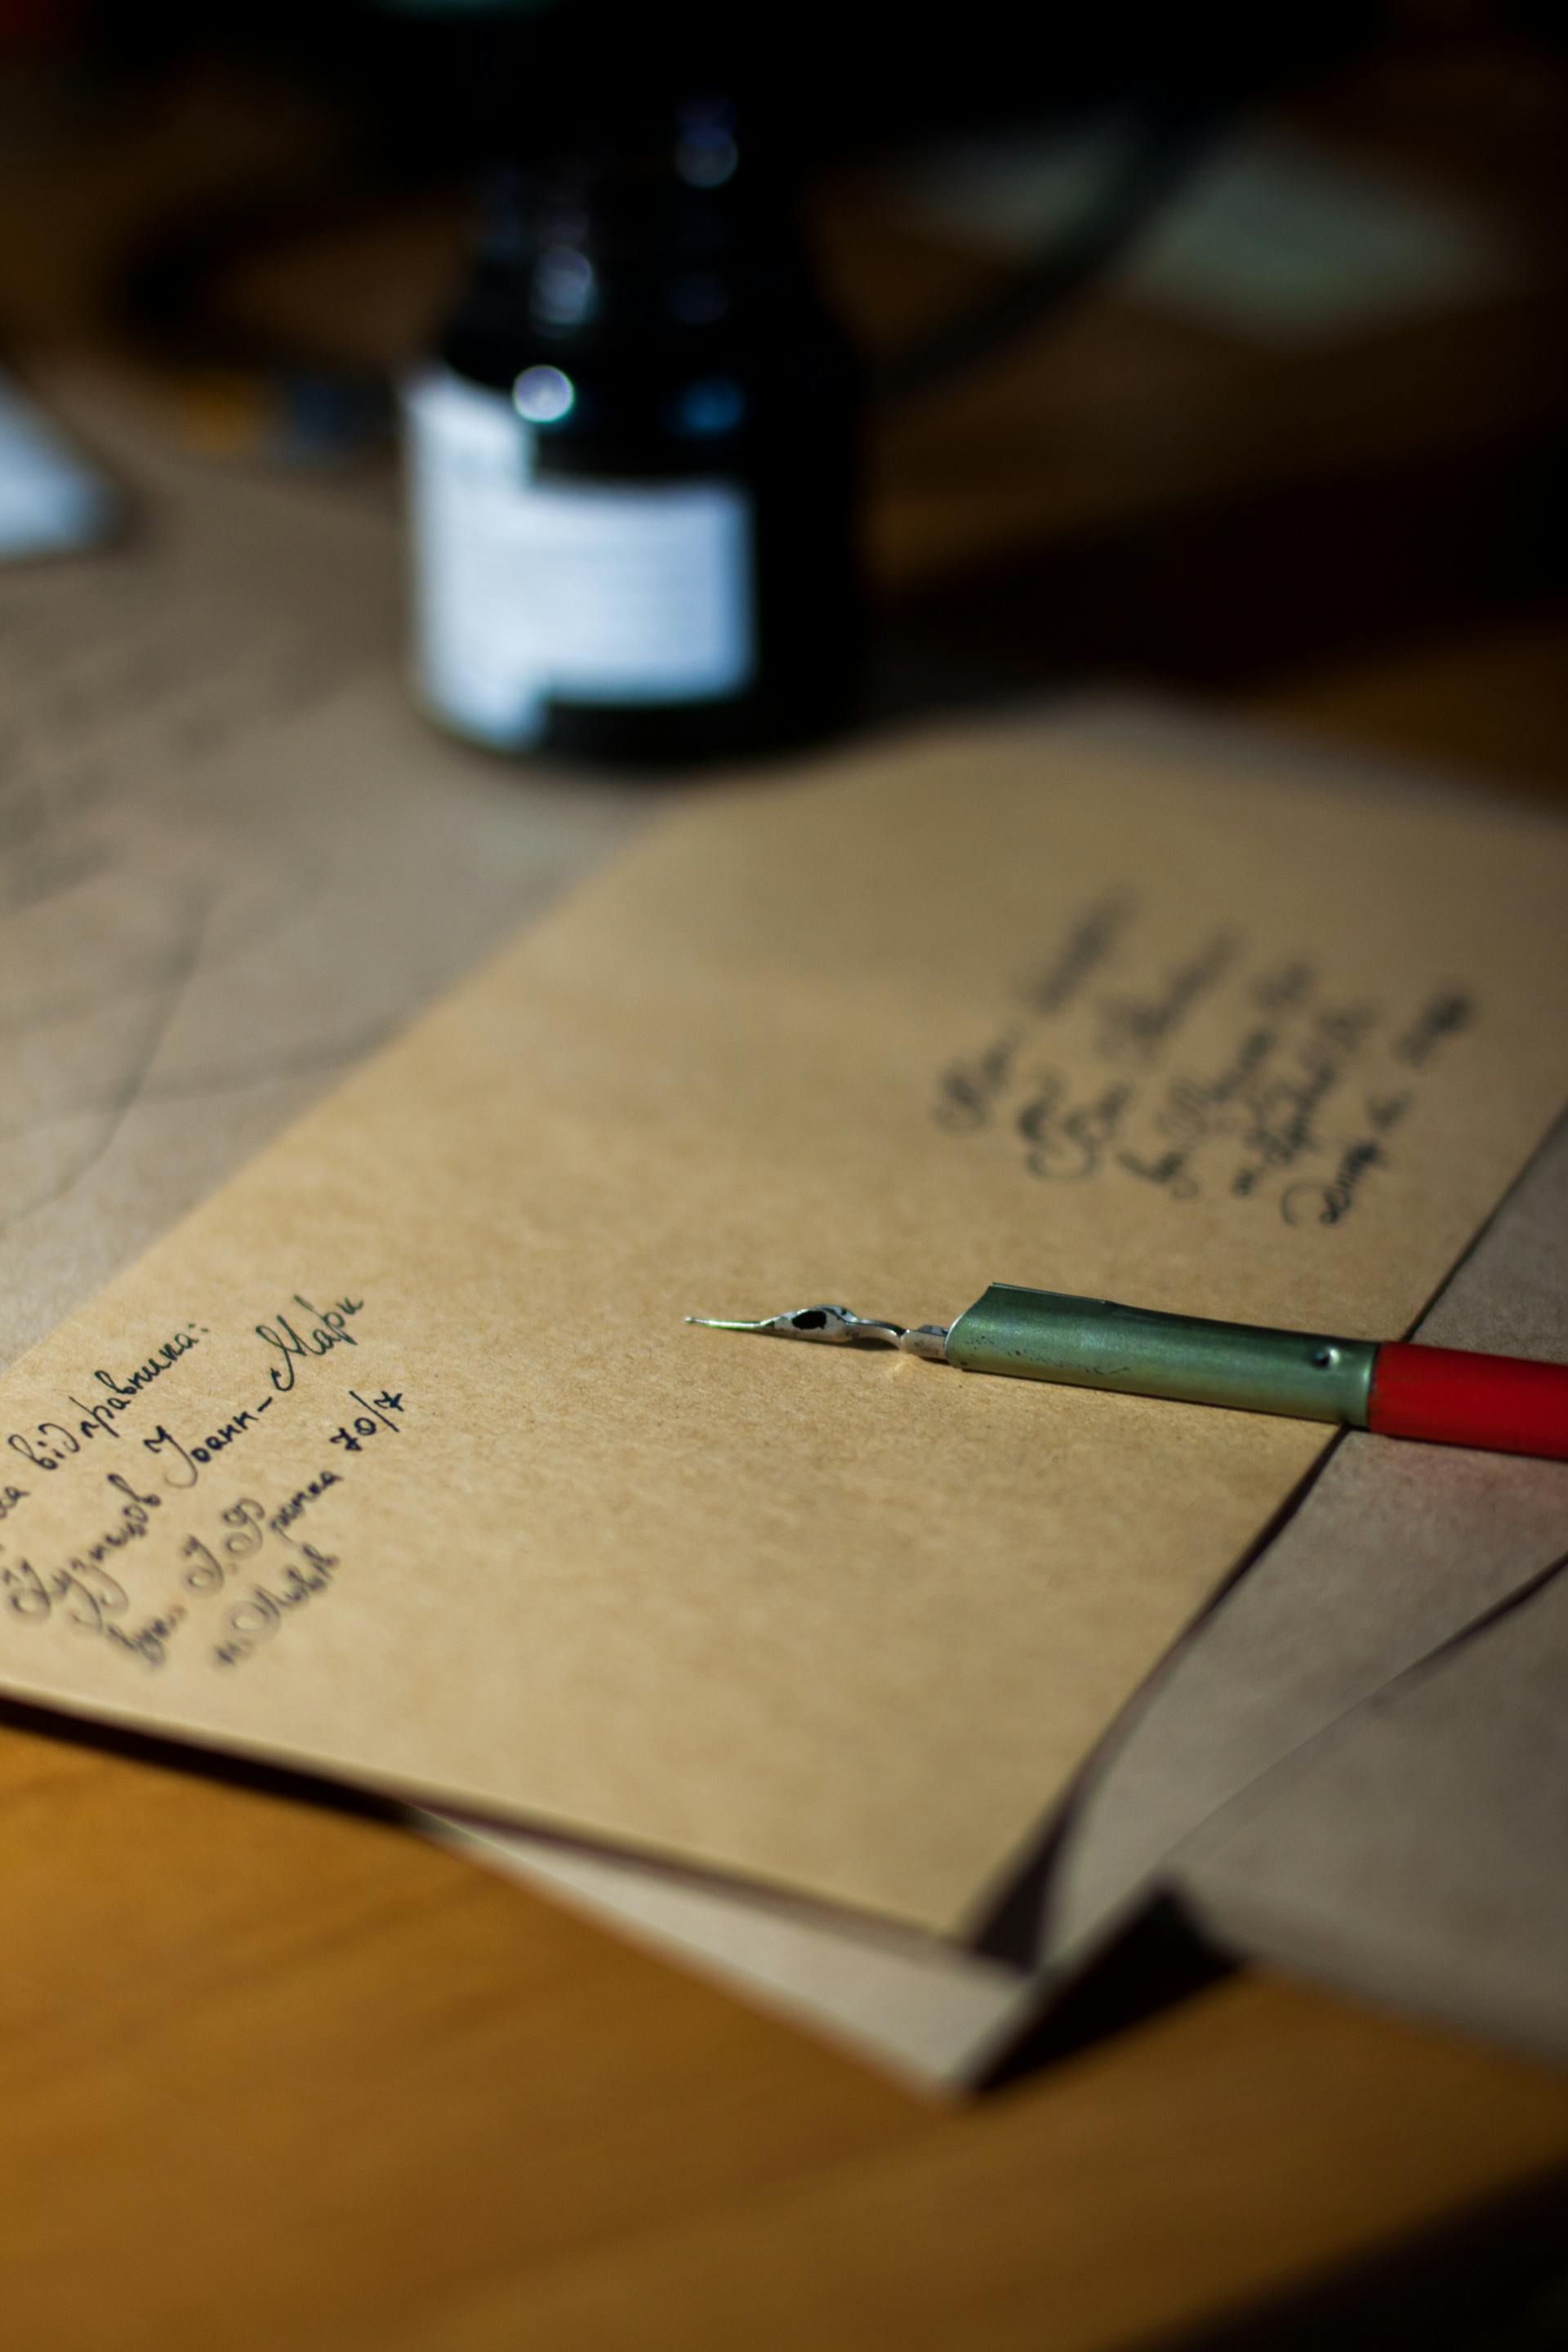 A brown envelope and ink pen on a table | Source: Pexels